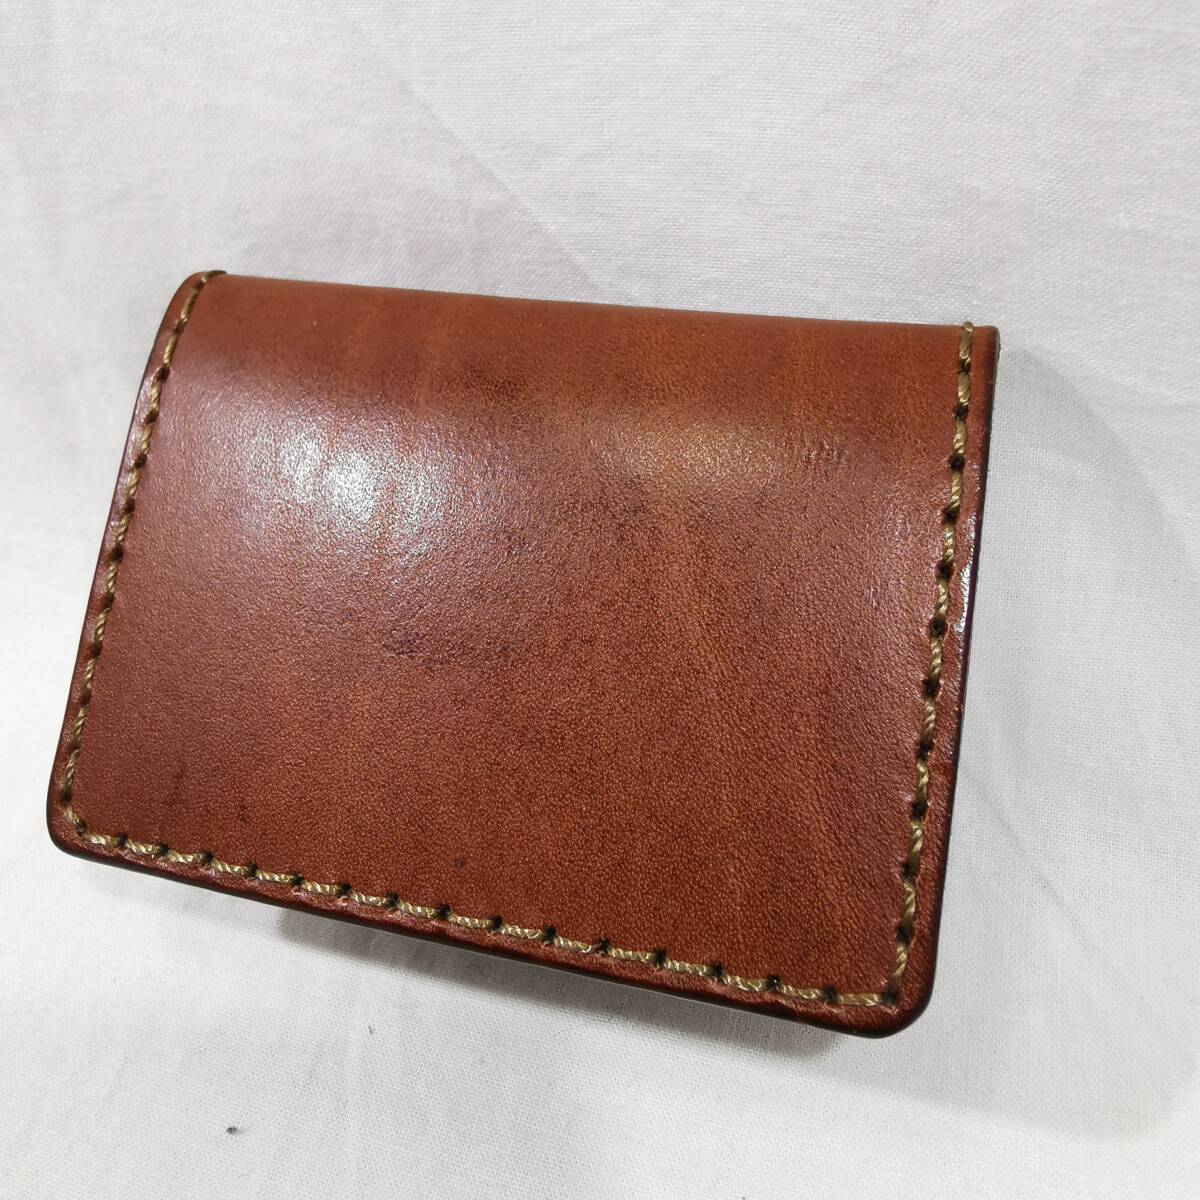  unused . close beautiful goods HERZ hell tsu leather card inserting attaching license proof case chocolate card-case width : approximately 10cm, length : approximately 7.5cm, inset : approximately 2cm